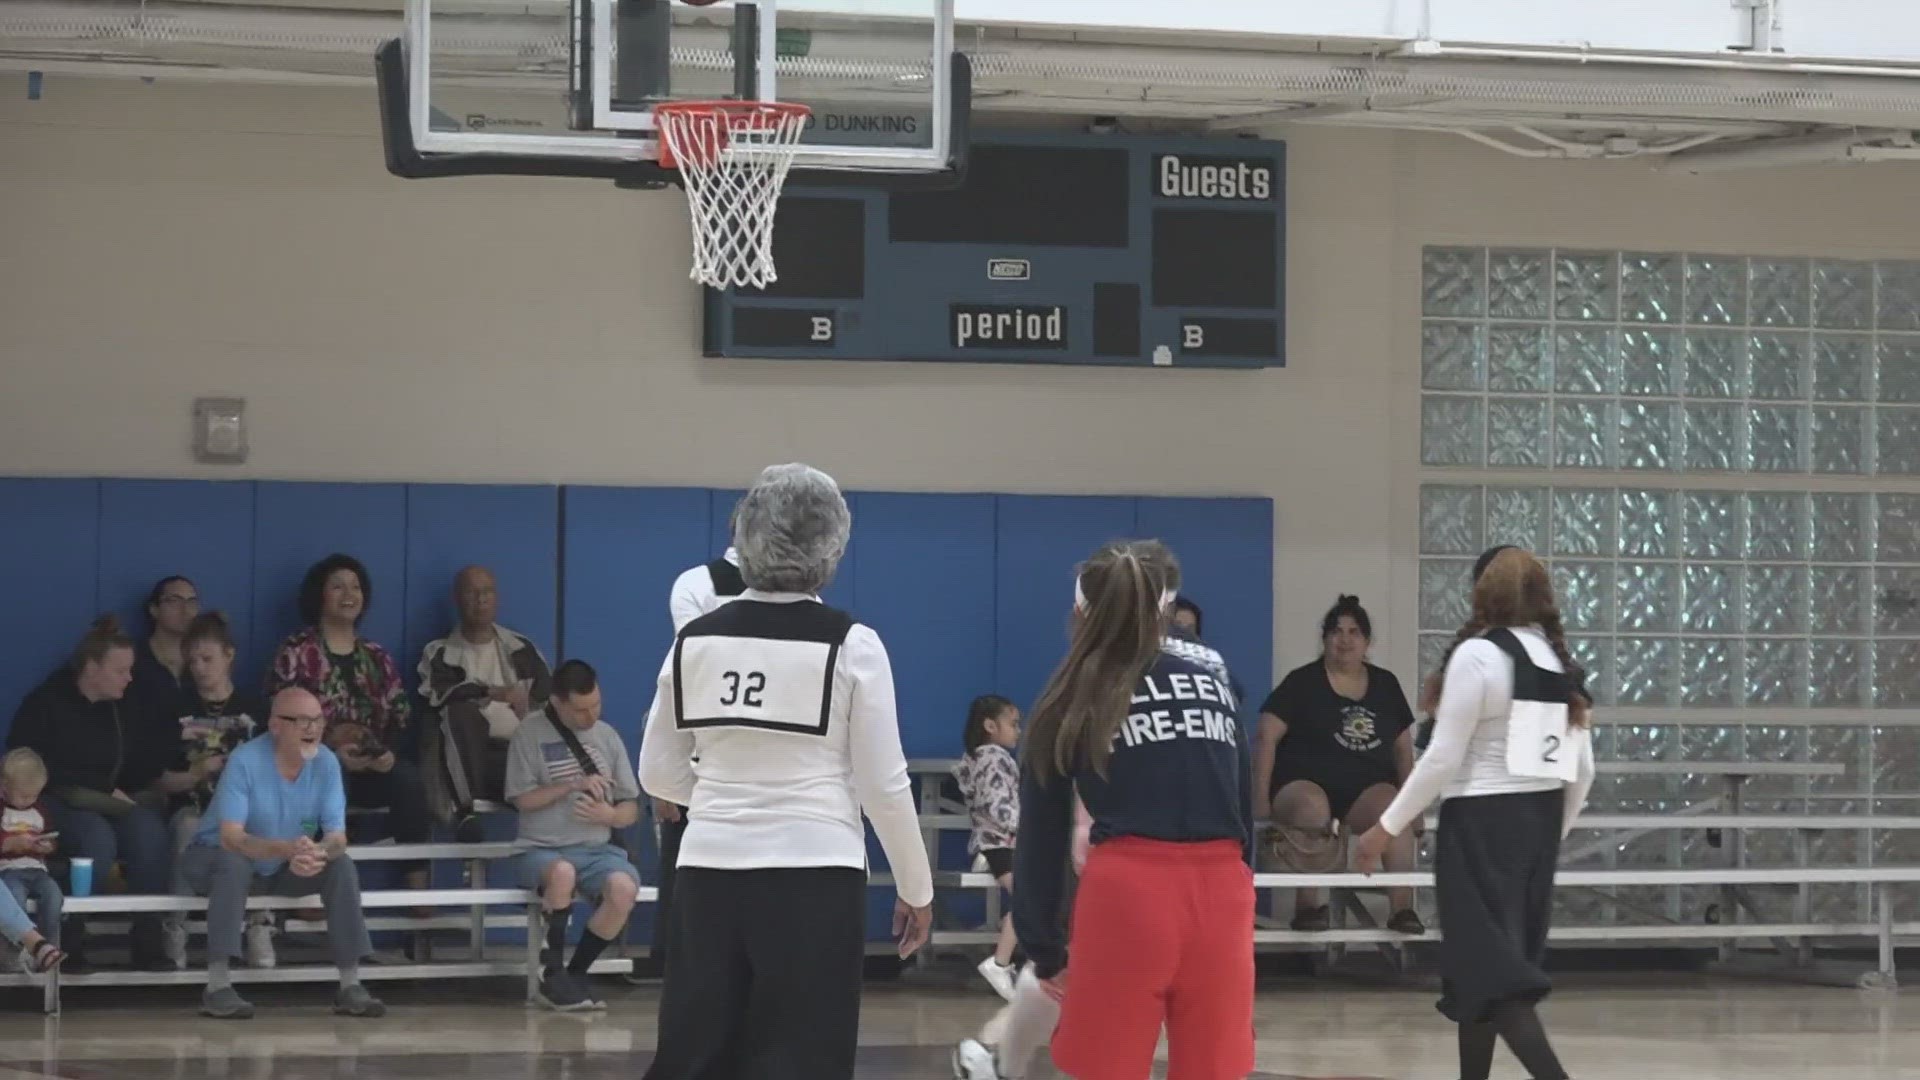 The granny basketball team proved their worth against the Killeen Fire Department. However, both teams remained united to raise funds for a good cause.